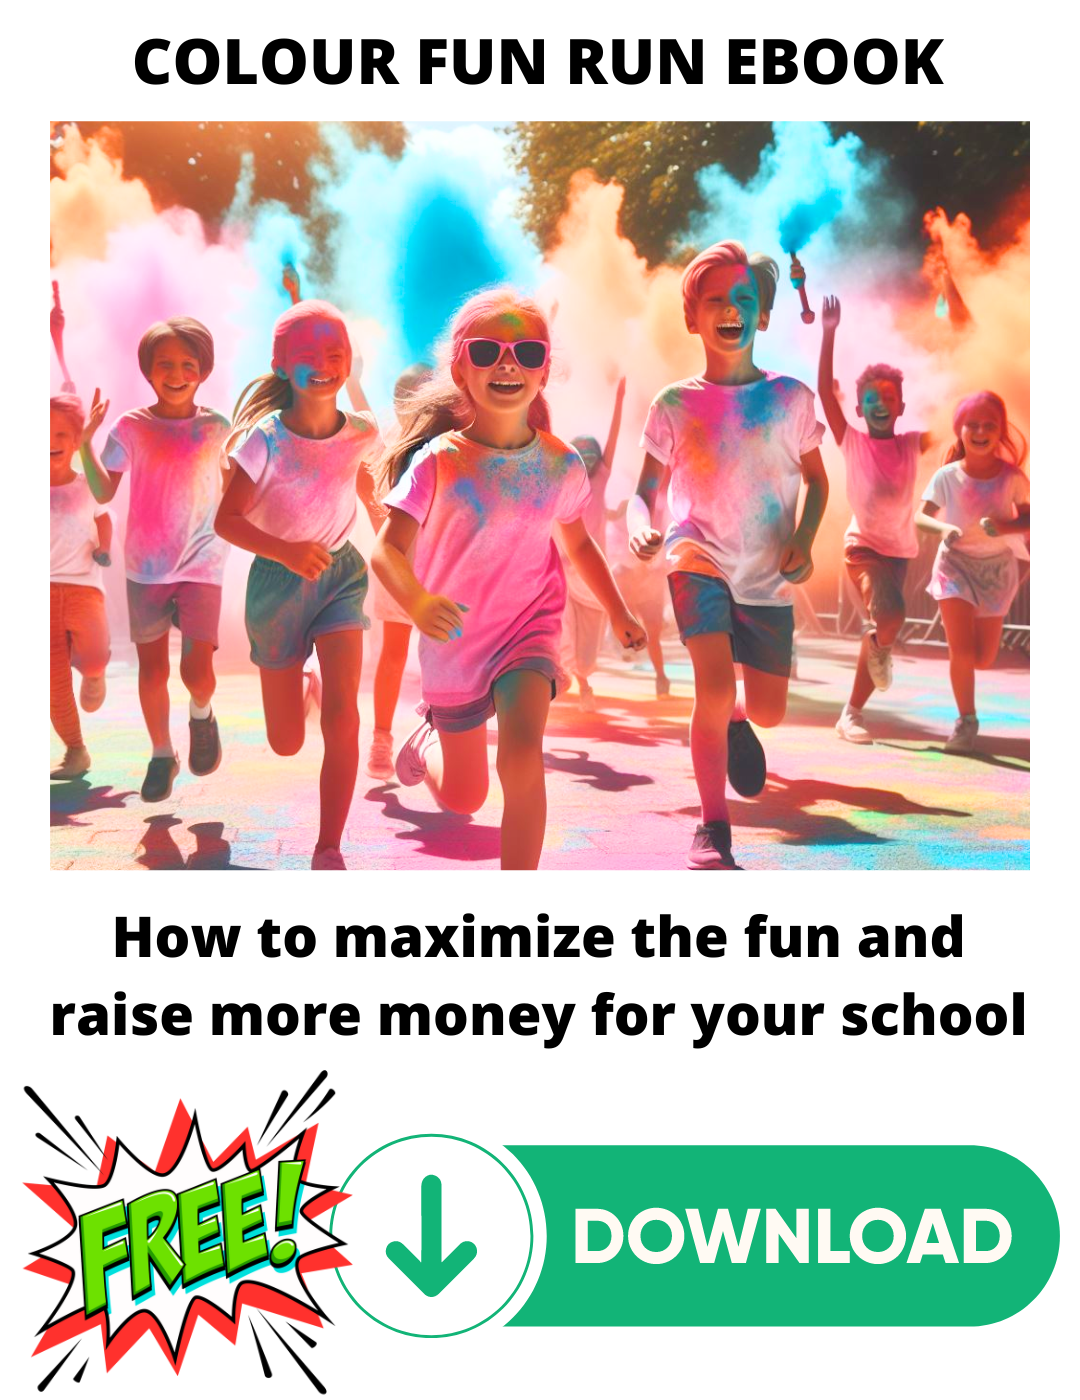 how to organize a fun and profitable color run for your school free ebook